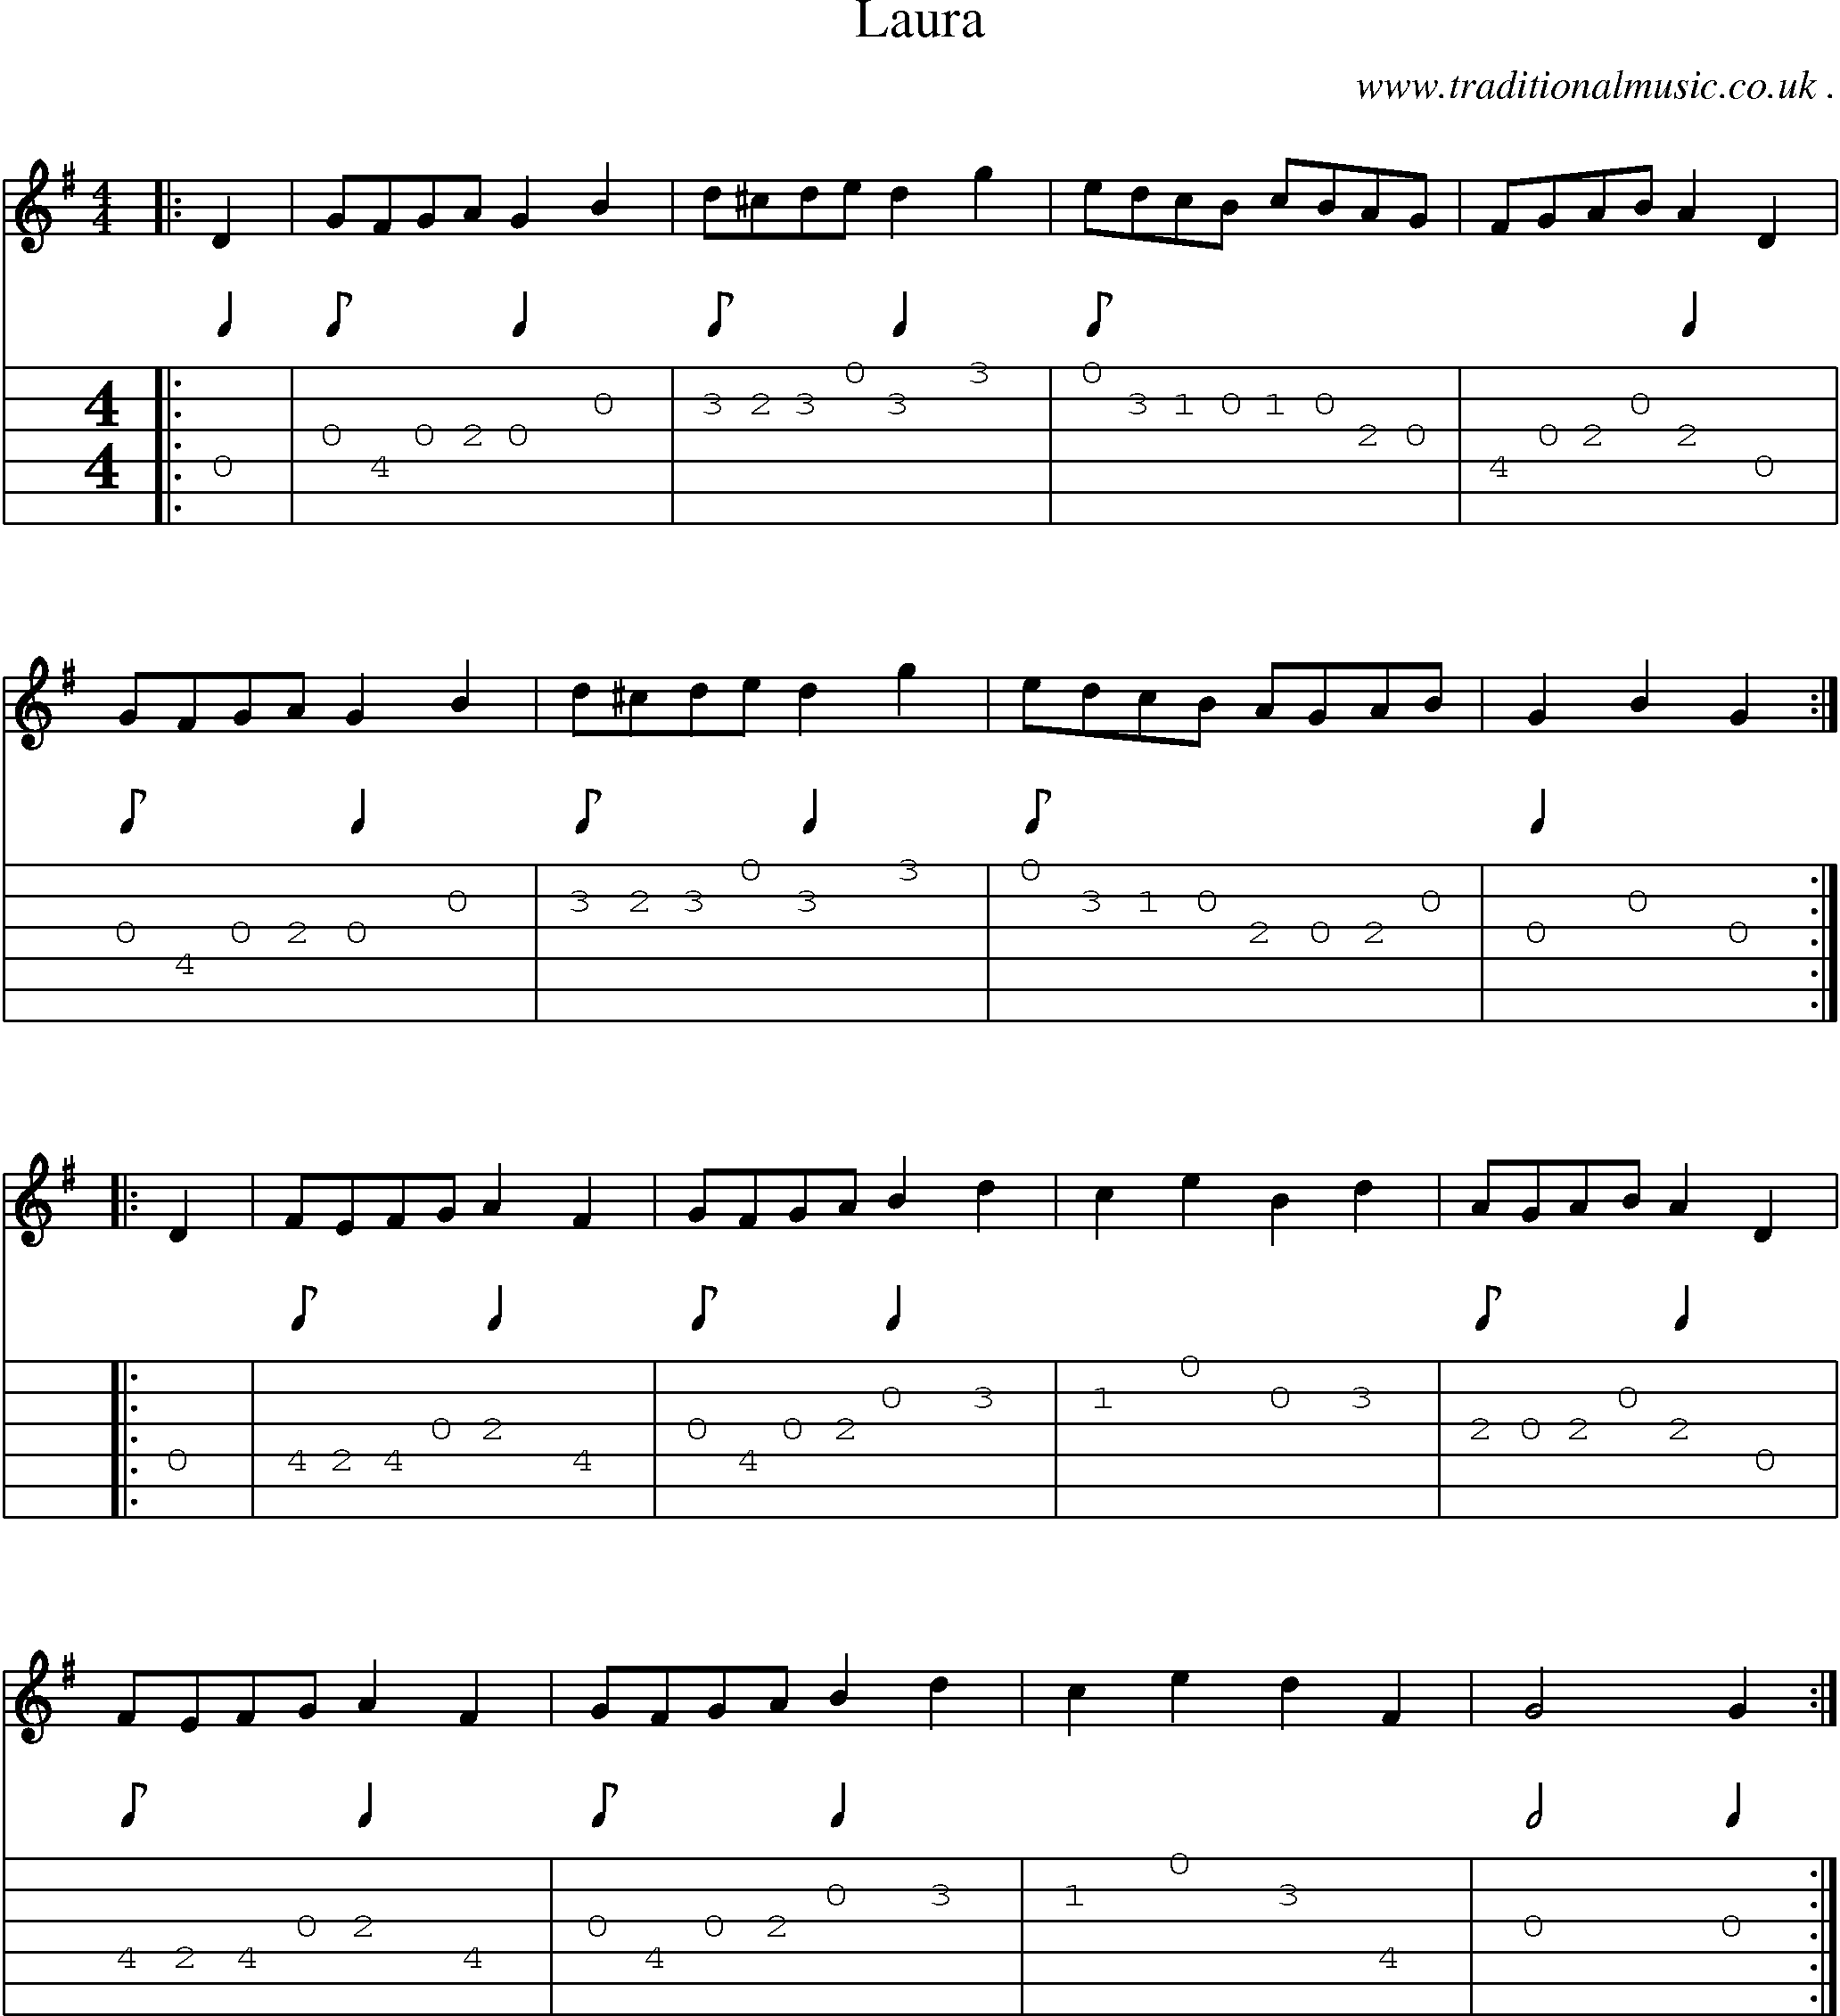 Sheet-Music and Guitar Tabs for Laura